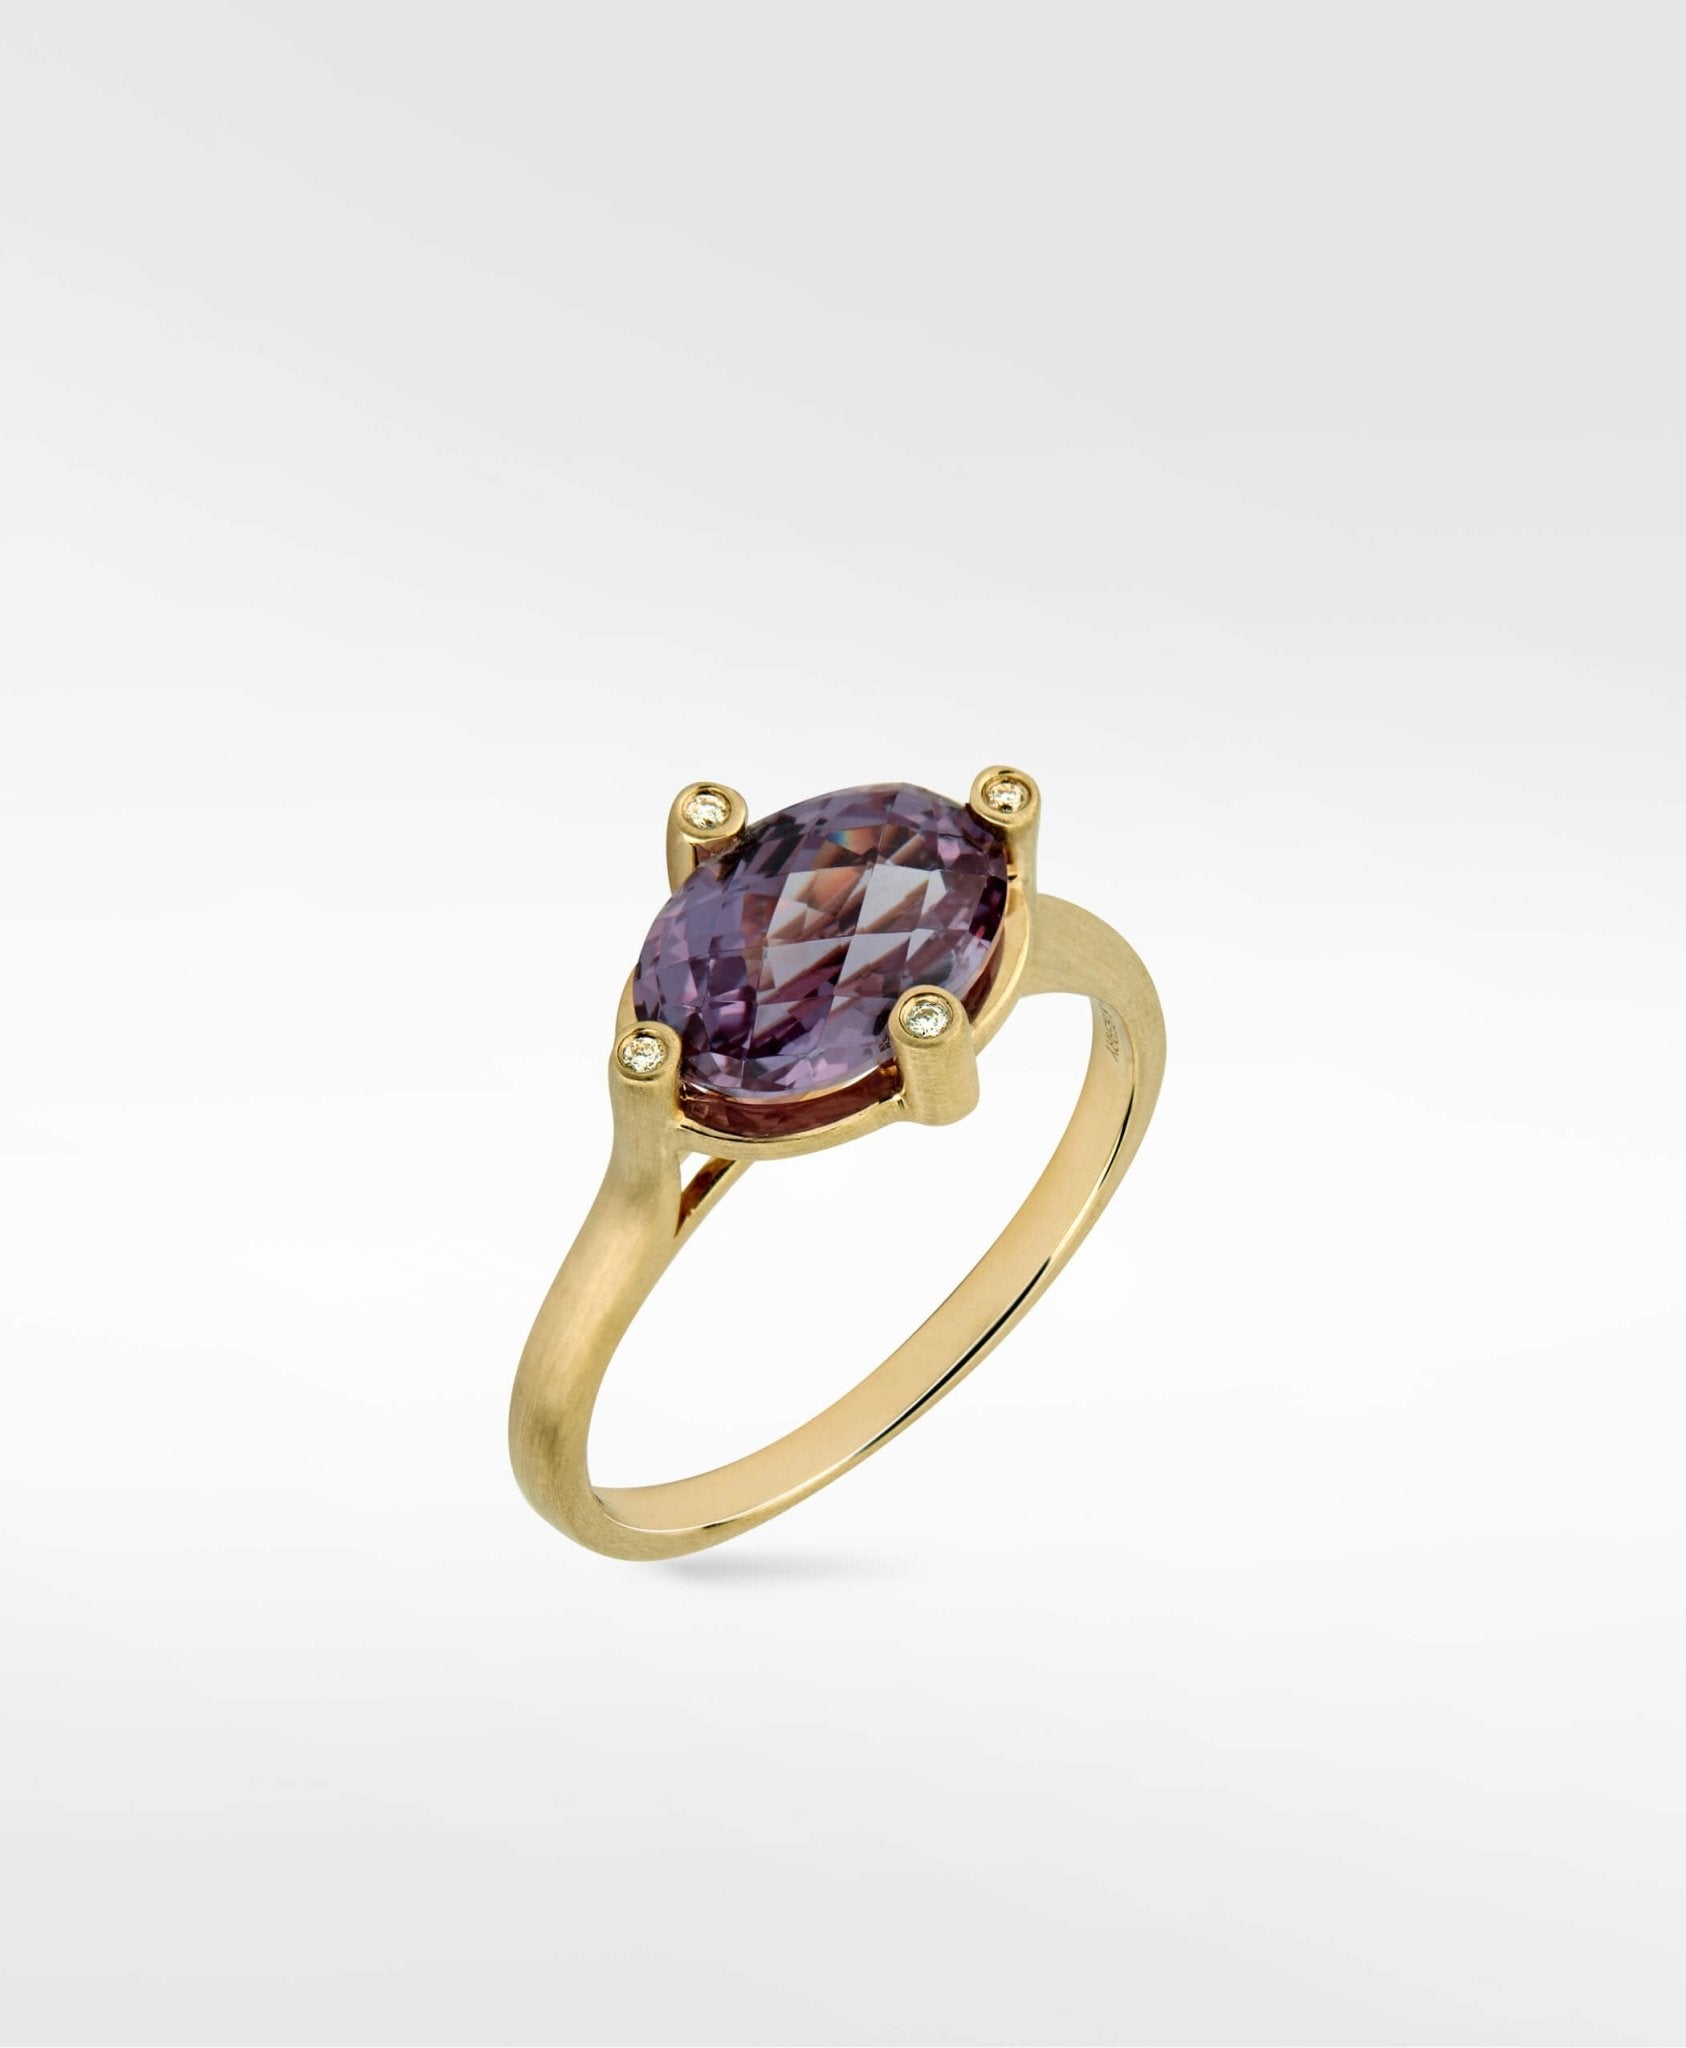 Dune Purple Sapphire Ring in Solid 14K Yellow Gold - Lark and Berry